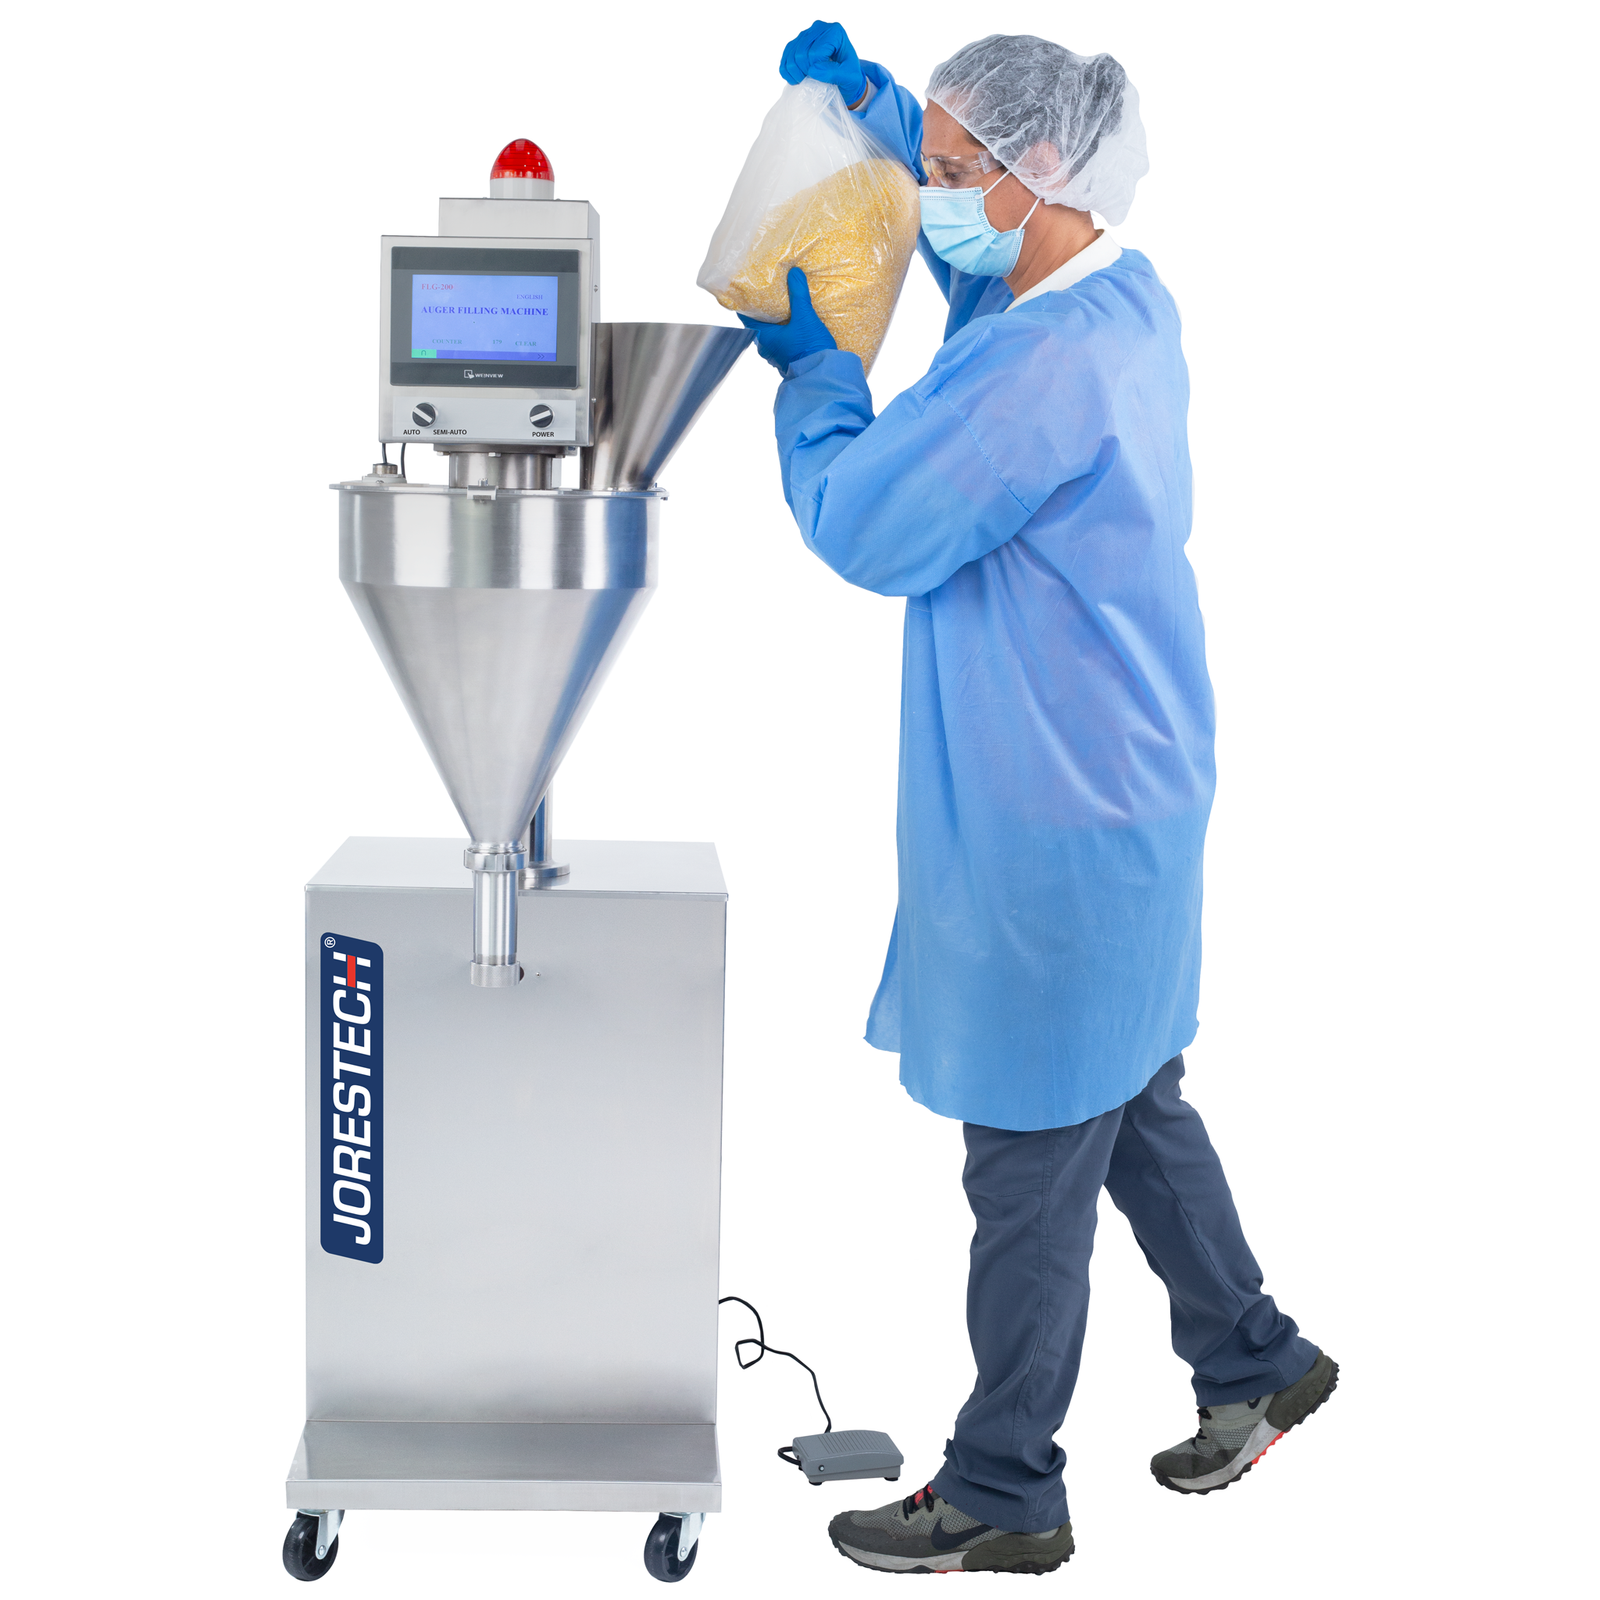 Close-up picture of a person with blue latex gloves and dressed in PPE holding a clear bag filled with cornmeal. The bag is held over the feeding cone of the JORES TECHNOLOGIES® auger powder filler, which will be used to dispense the flour into containers.